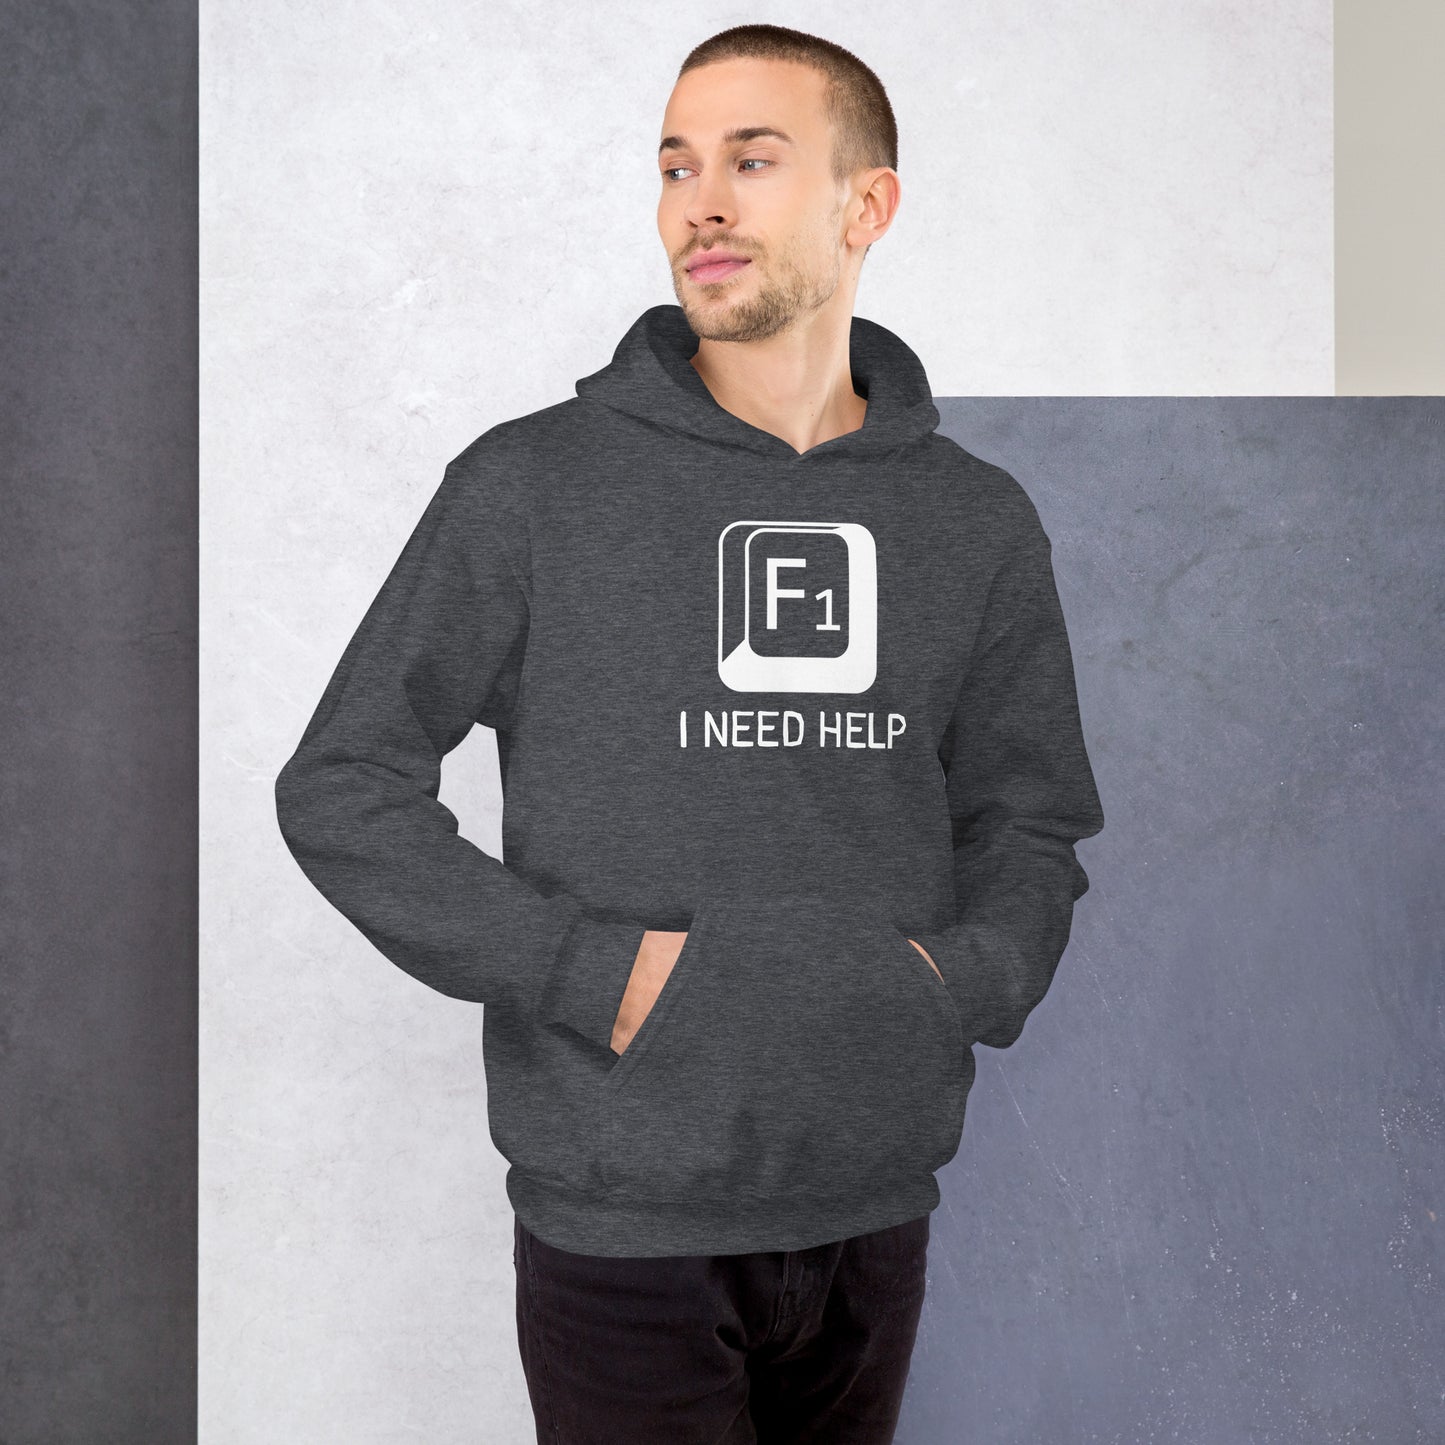 Men with dark heather hoodie and a picture of F1 key with text "I need help"